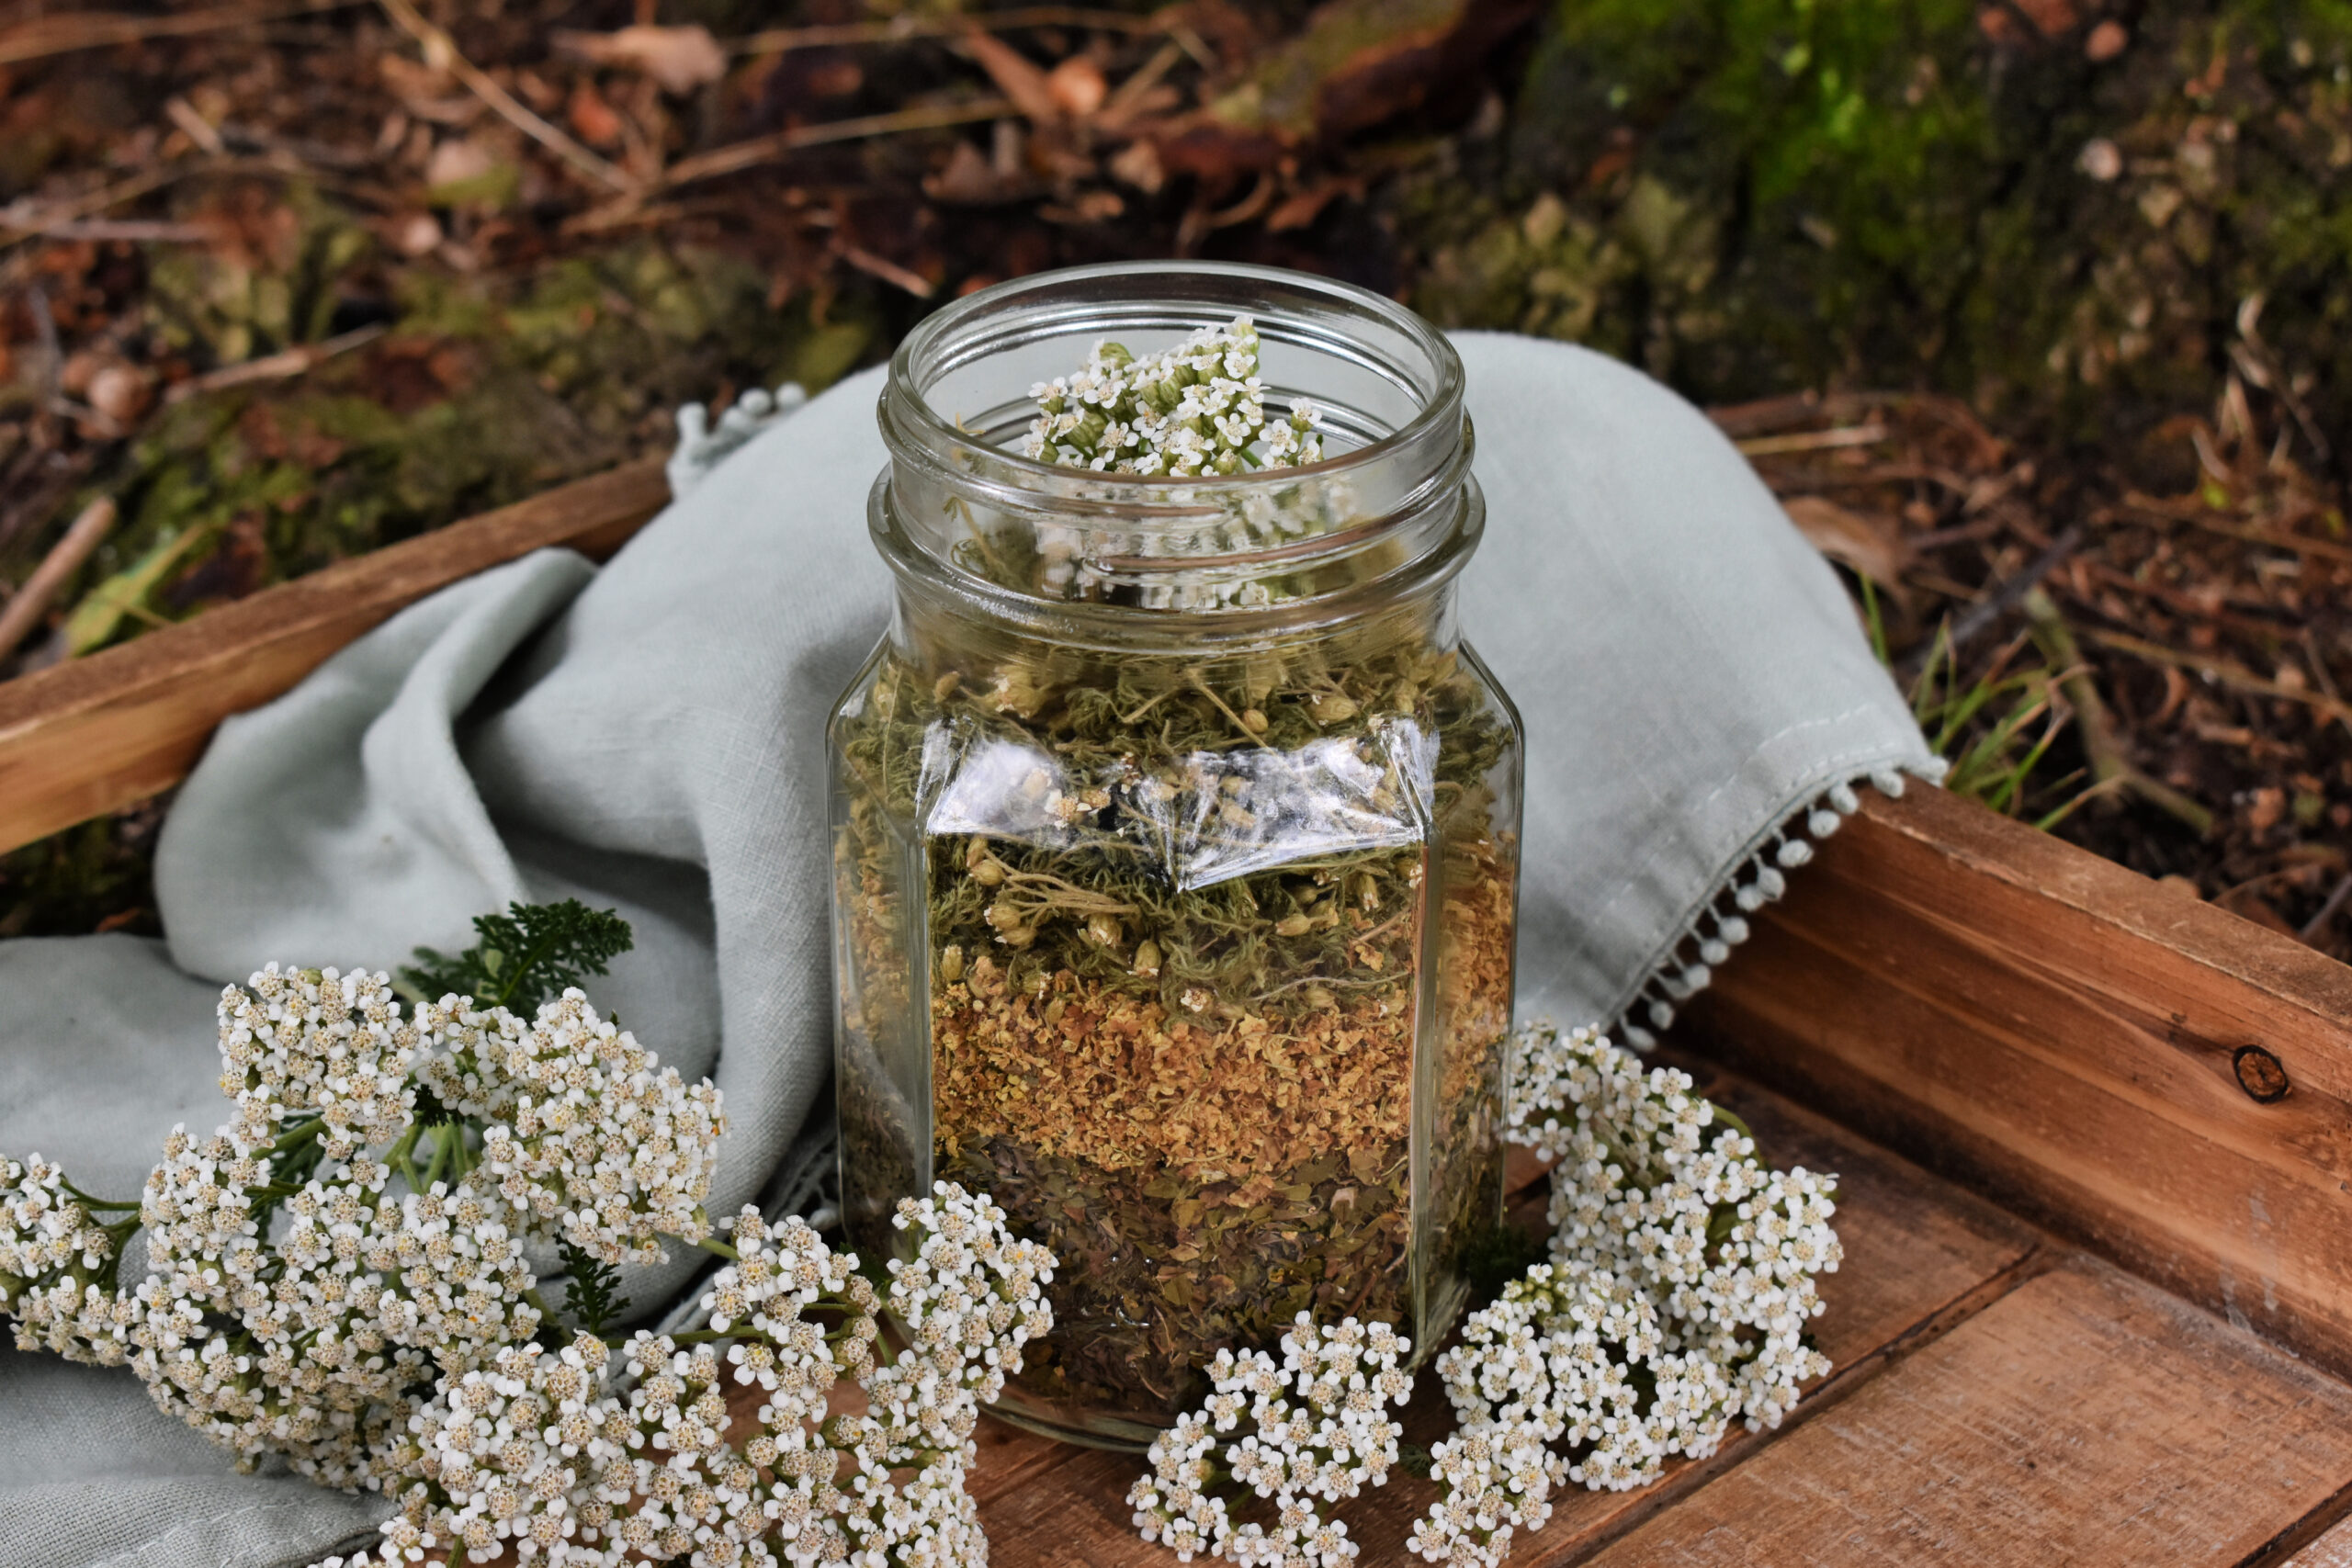 Best places to buy dried herbs online